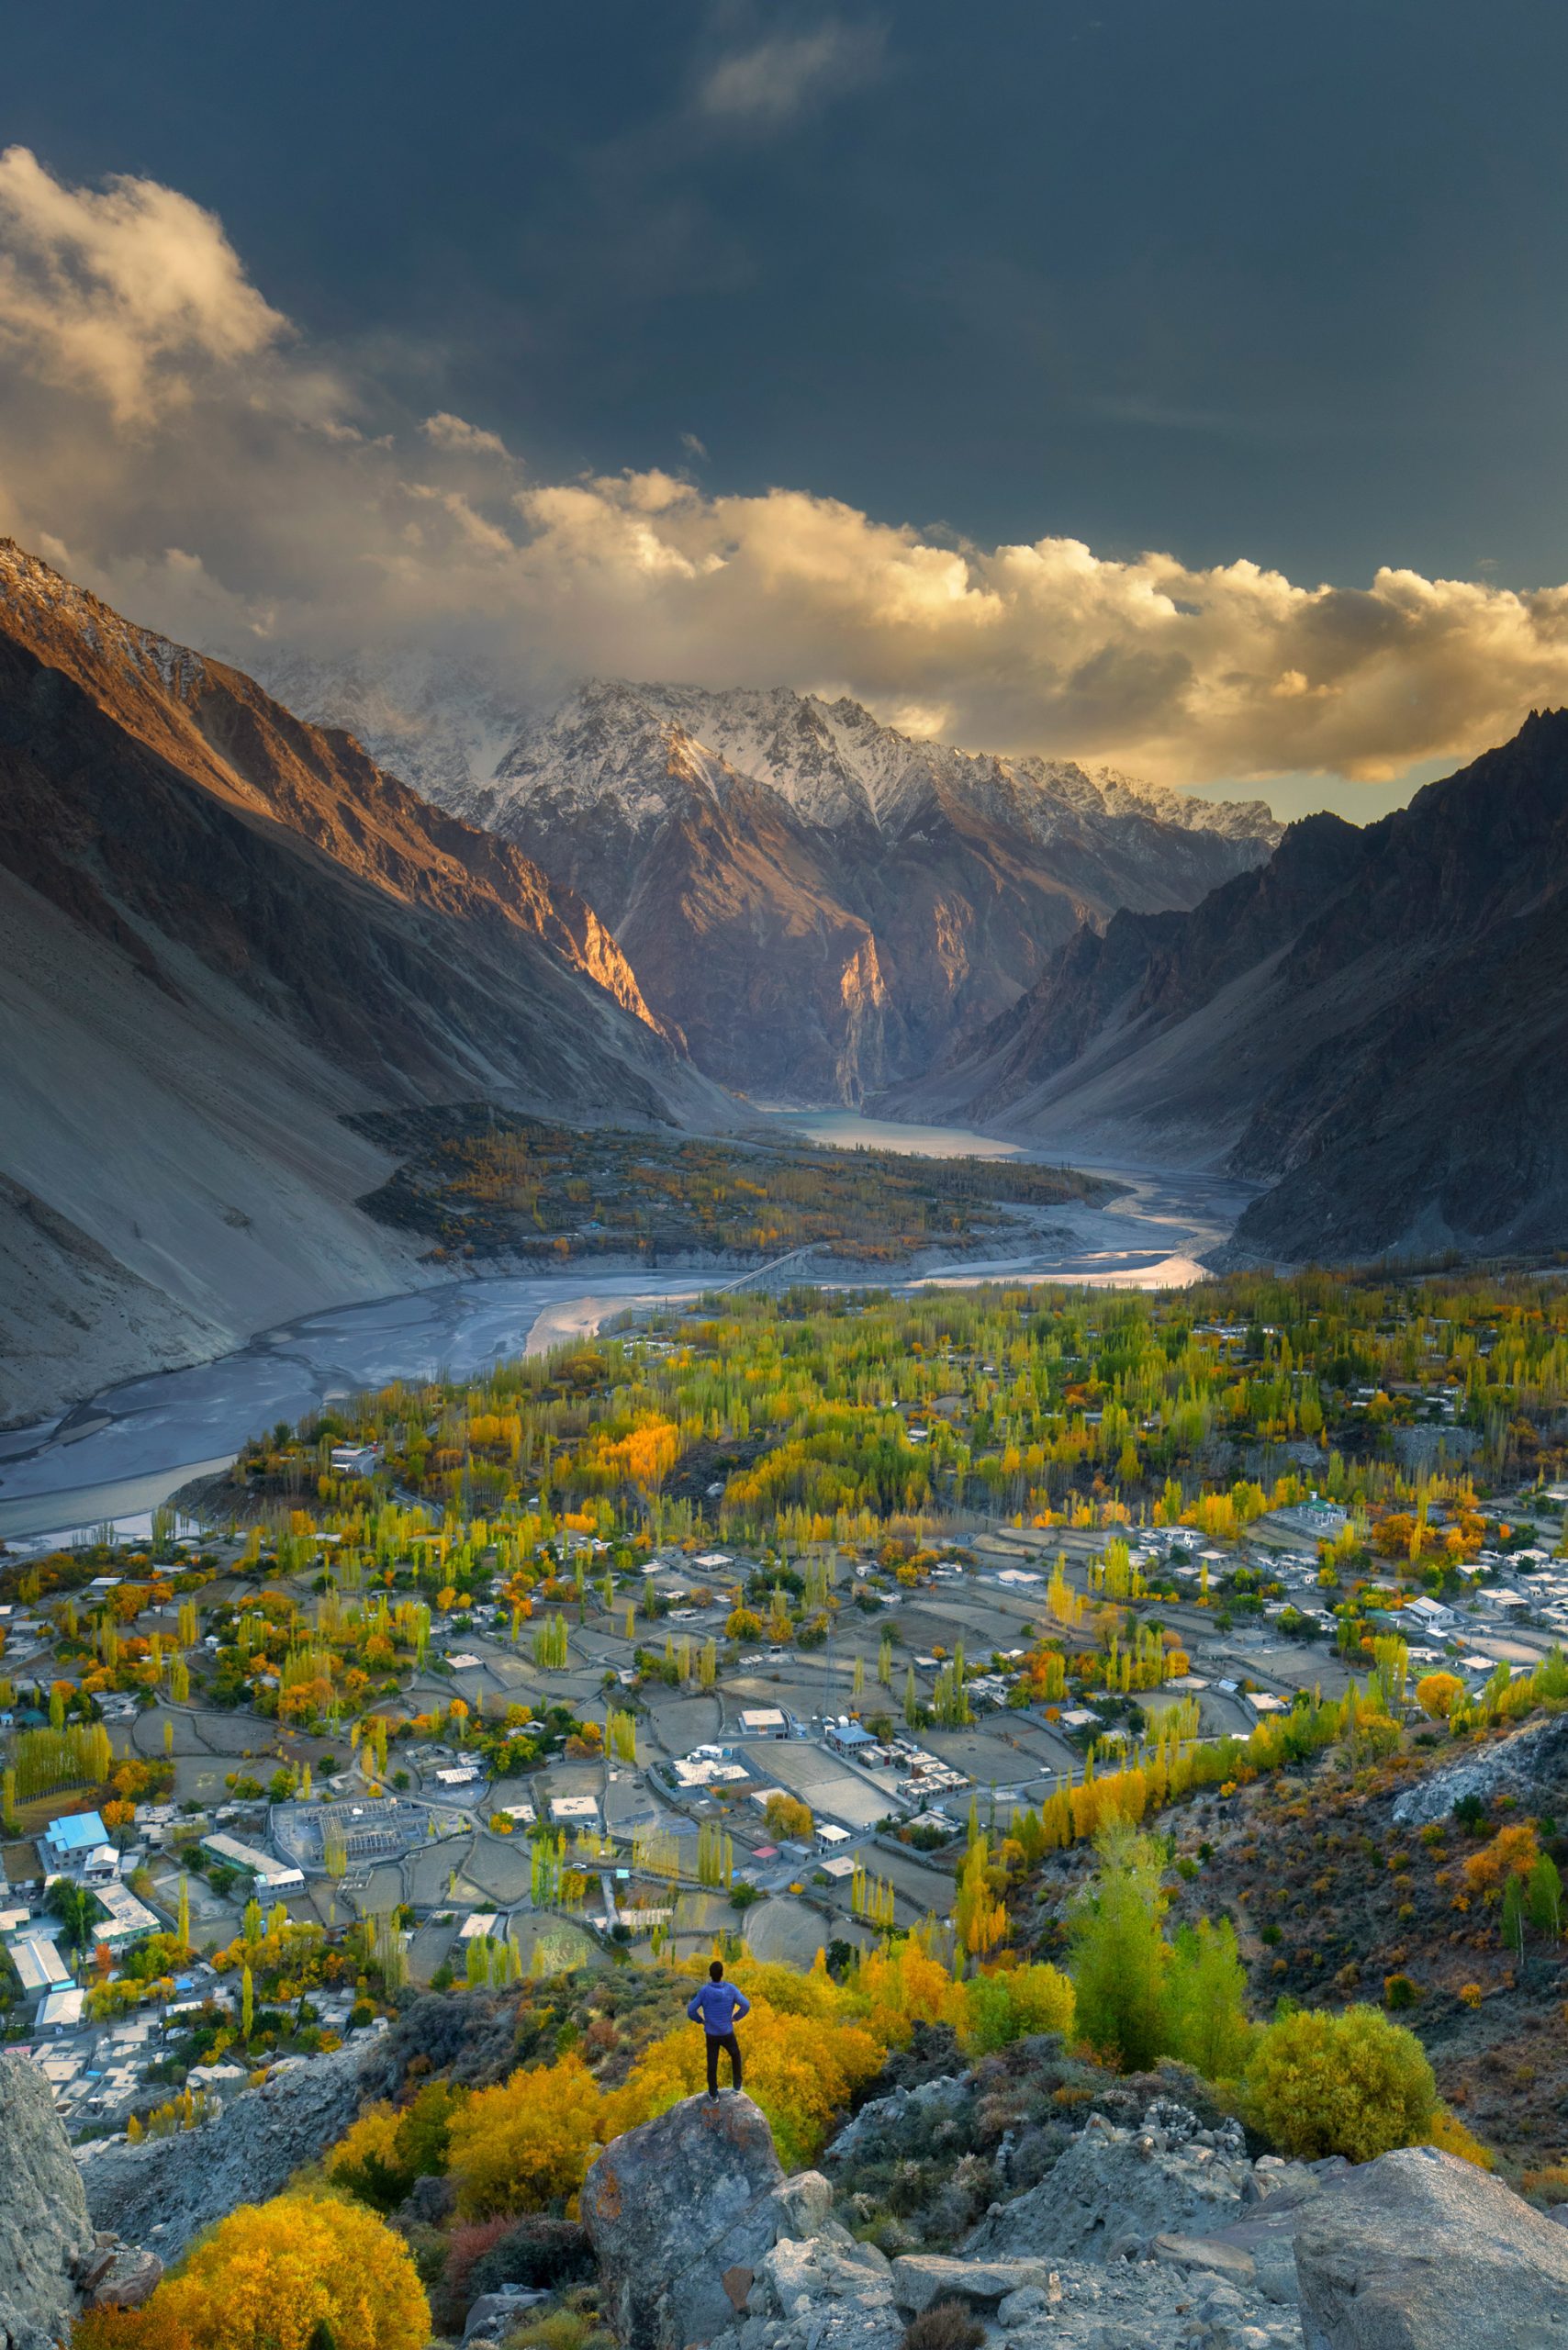 Autumn colours in Gul-e-Gulmit, as seen from Ondra Fort